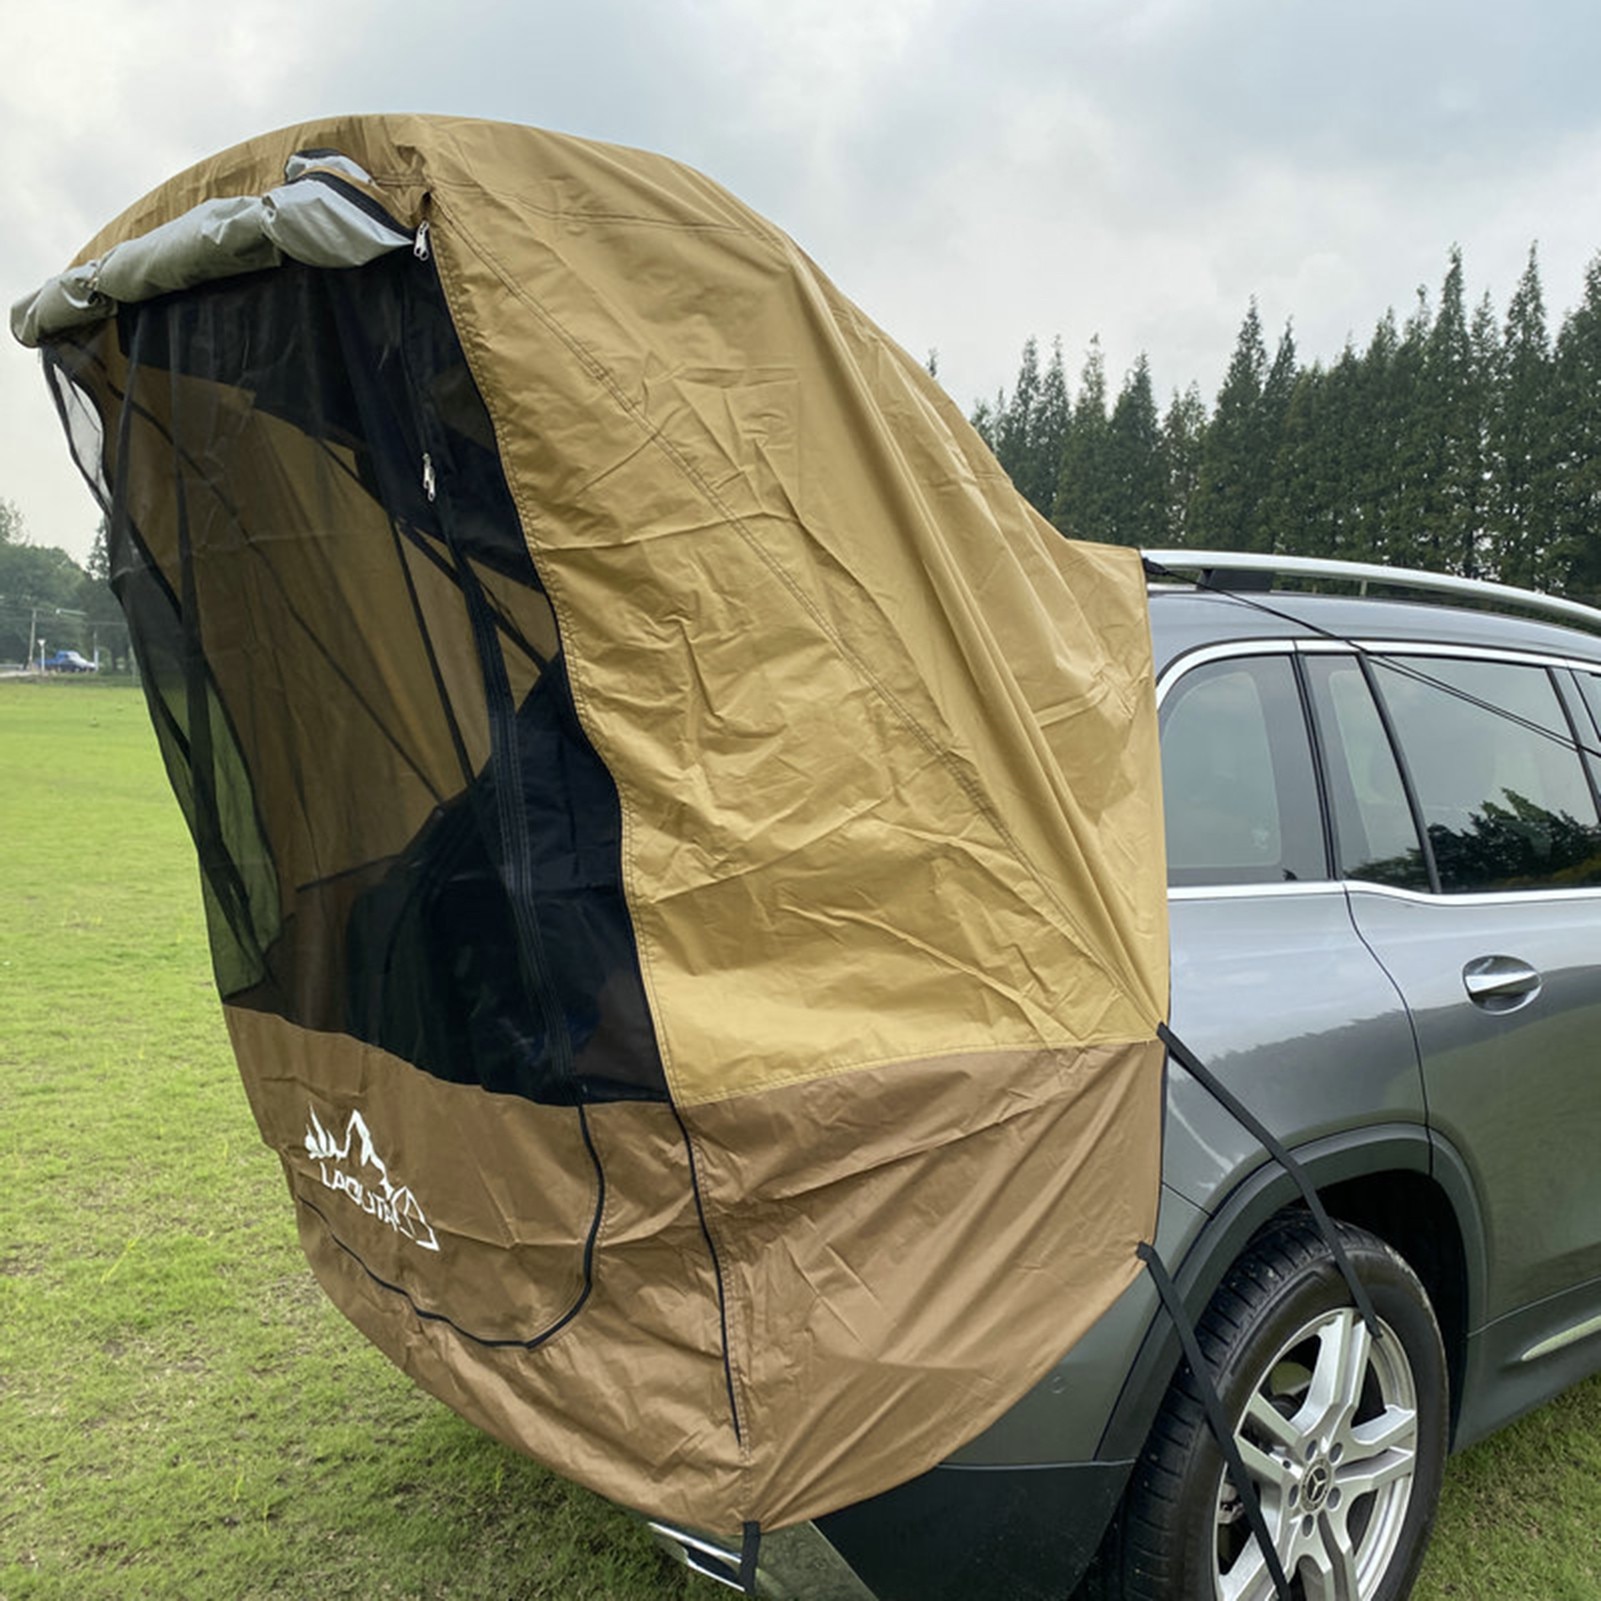 Portable Car Awning Rooftop Tent Sun Shelter Shade Sunshade Rainproof Car Trunk Tents Camping Canopy Outdoor Travel Hiking Tents 